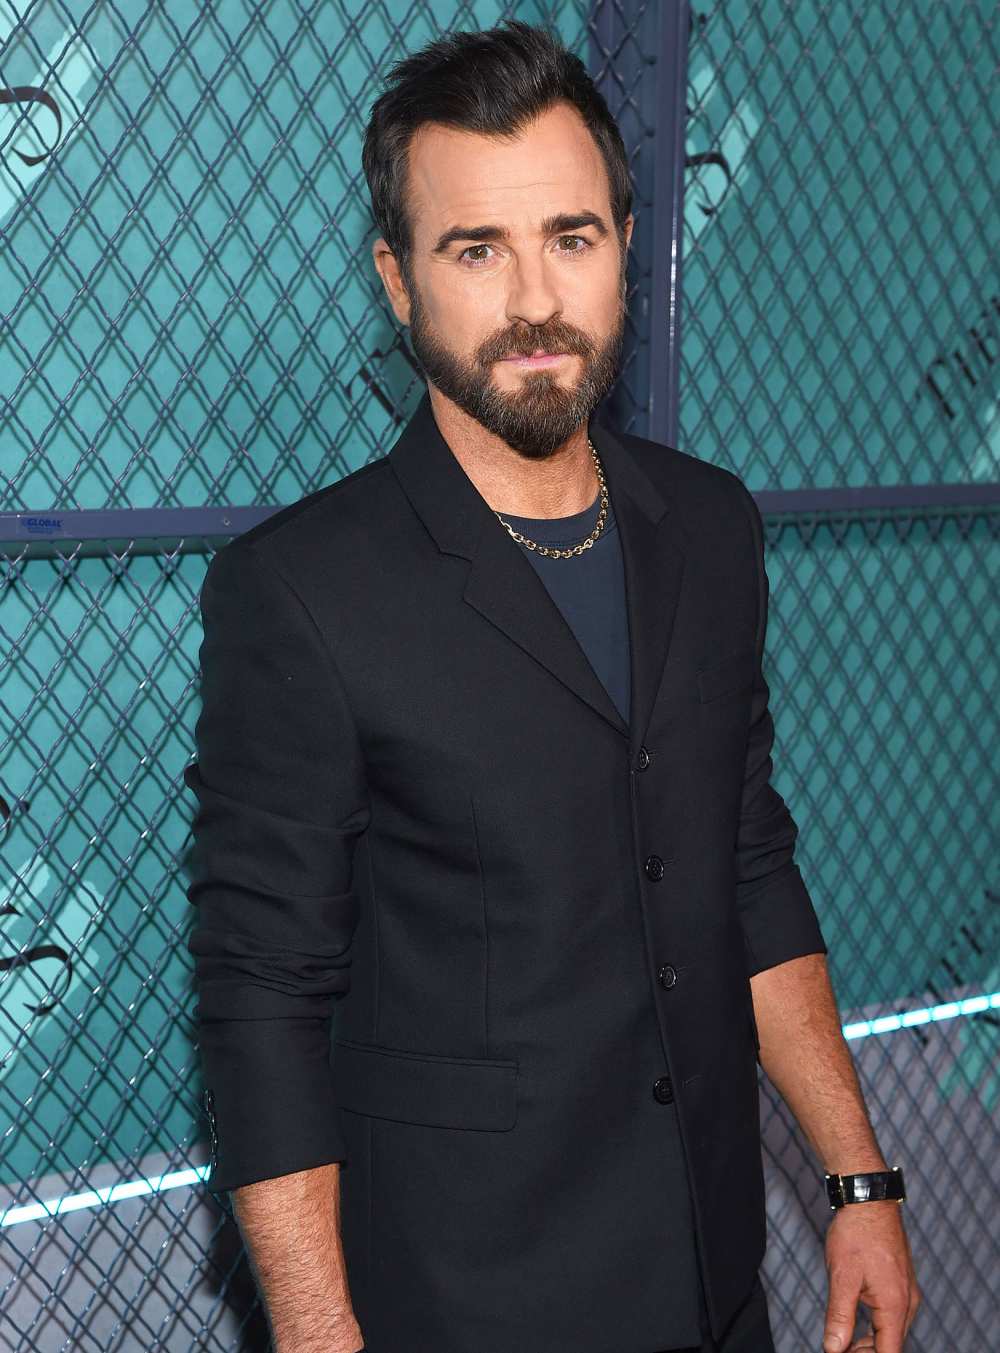 Trainer Talks Justin Theroux's ‘Super Consistent’ Workout Routine